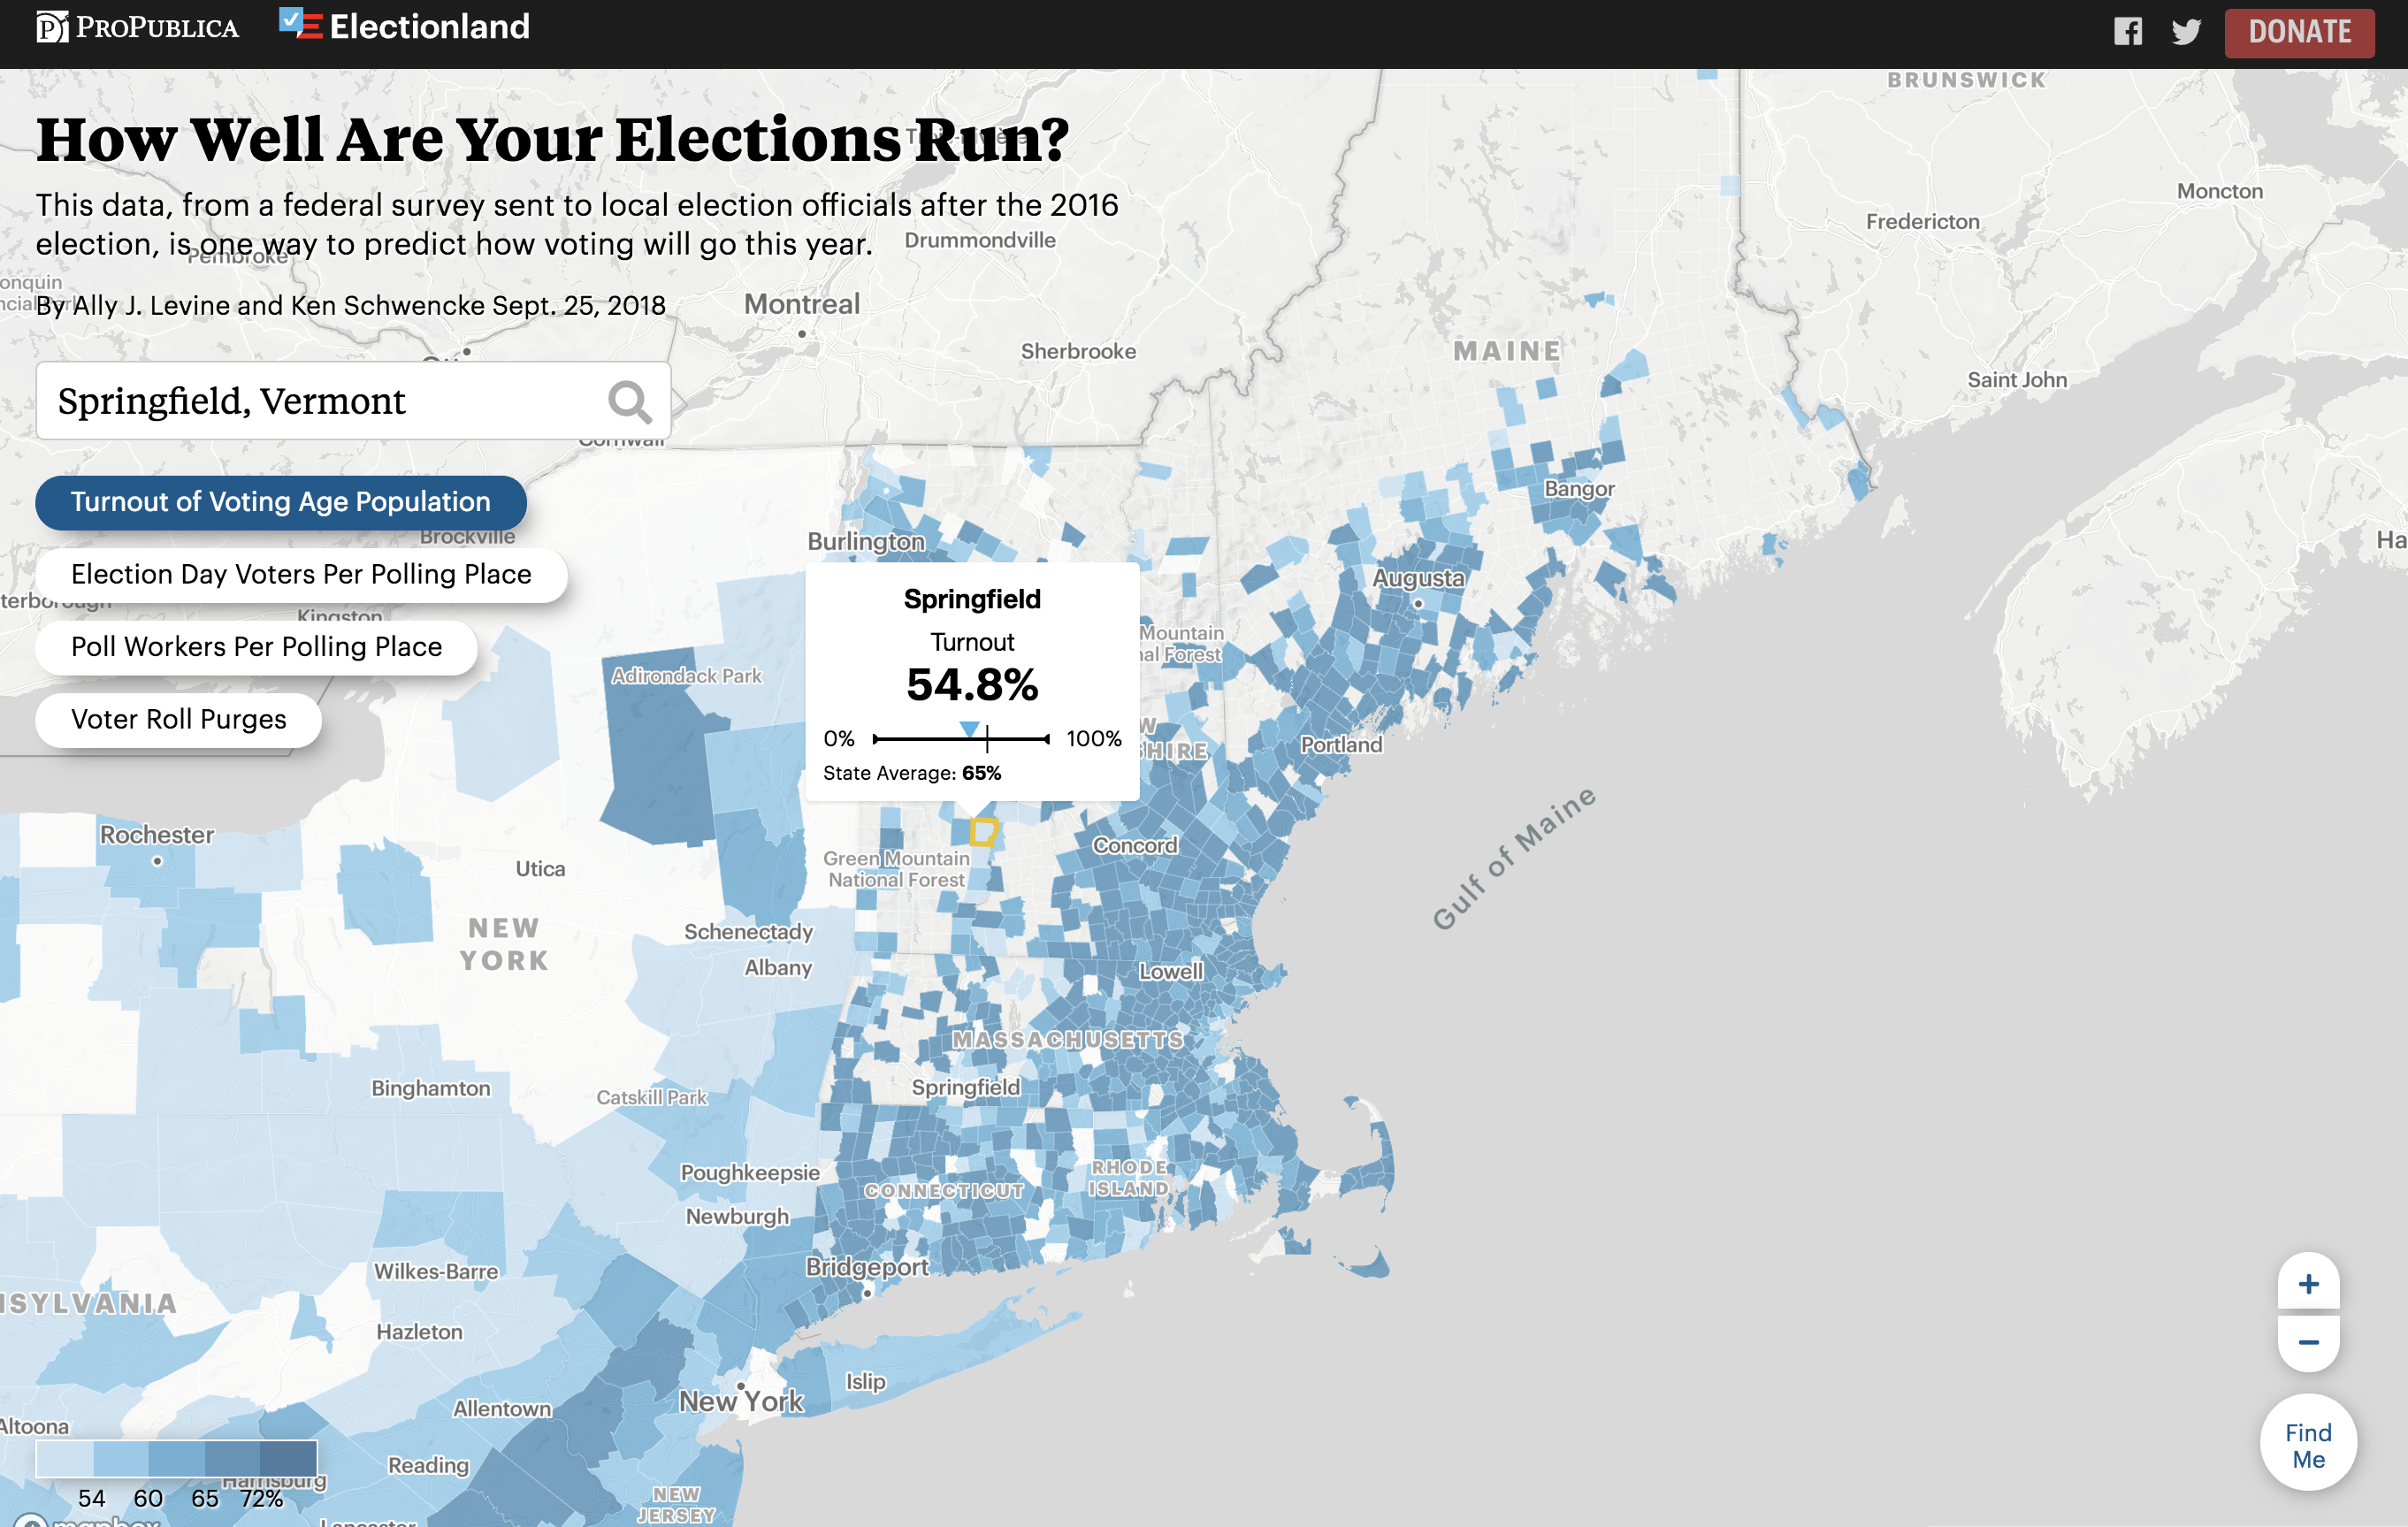 With ProPublica’s Electionland data tool “How Well Are Your Elections Run?,” voters can compare voter turnout in their county to others within their state or around the nation 